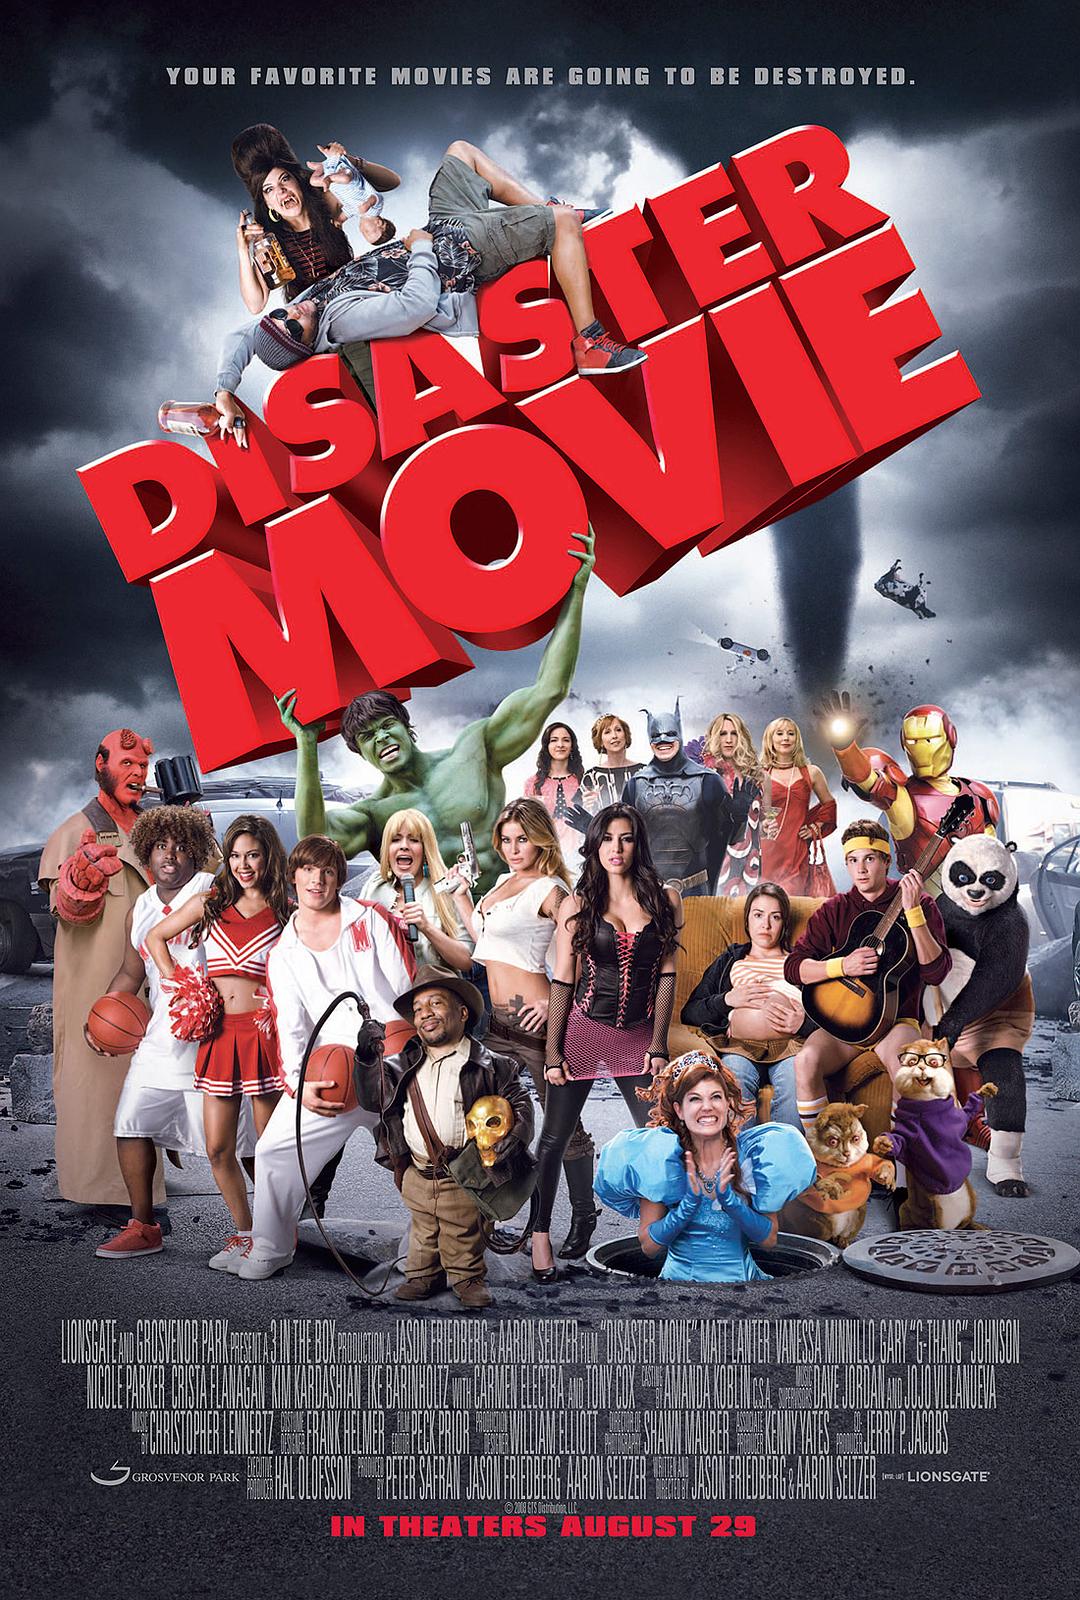 ѴӰ Disaster.Movie.2008.iNTERNAL.UNRATED.720p.BluRay.x264-GUACAMOLE 4.36GB-1.png